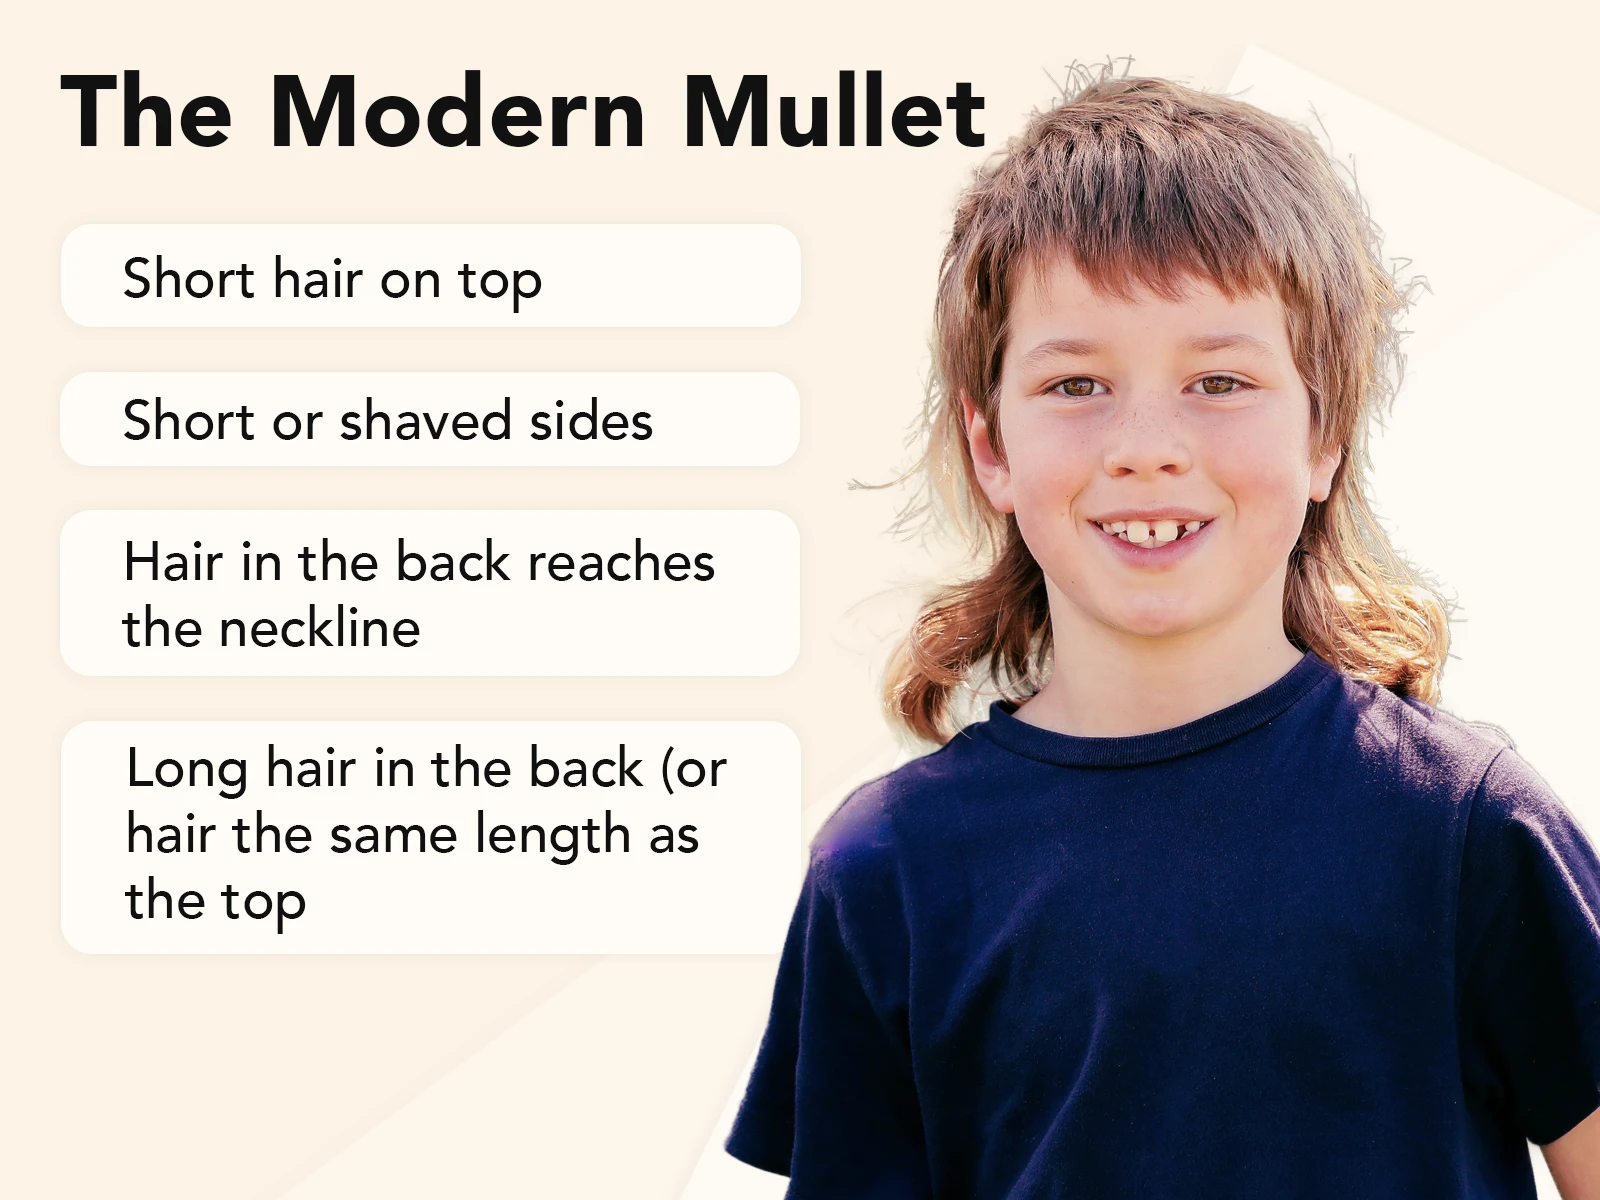 the modern mullet explainer image on a tan background with a person wearing the style on the right